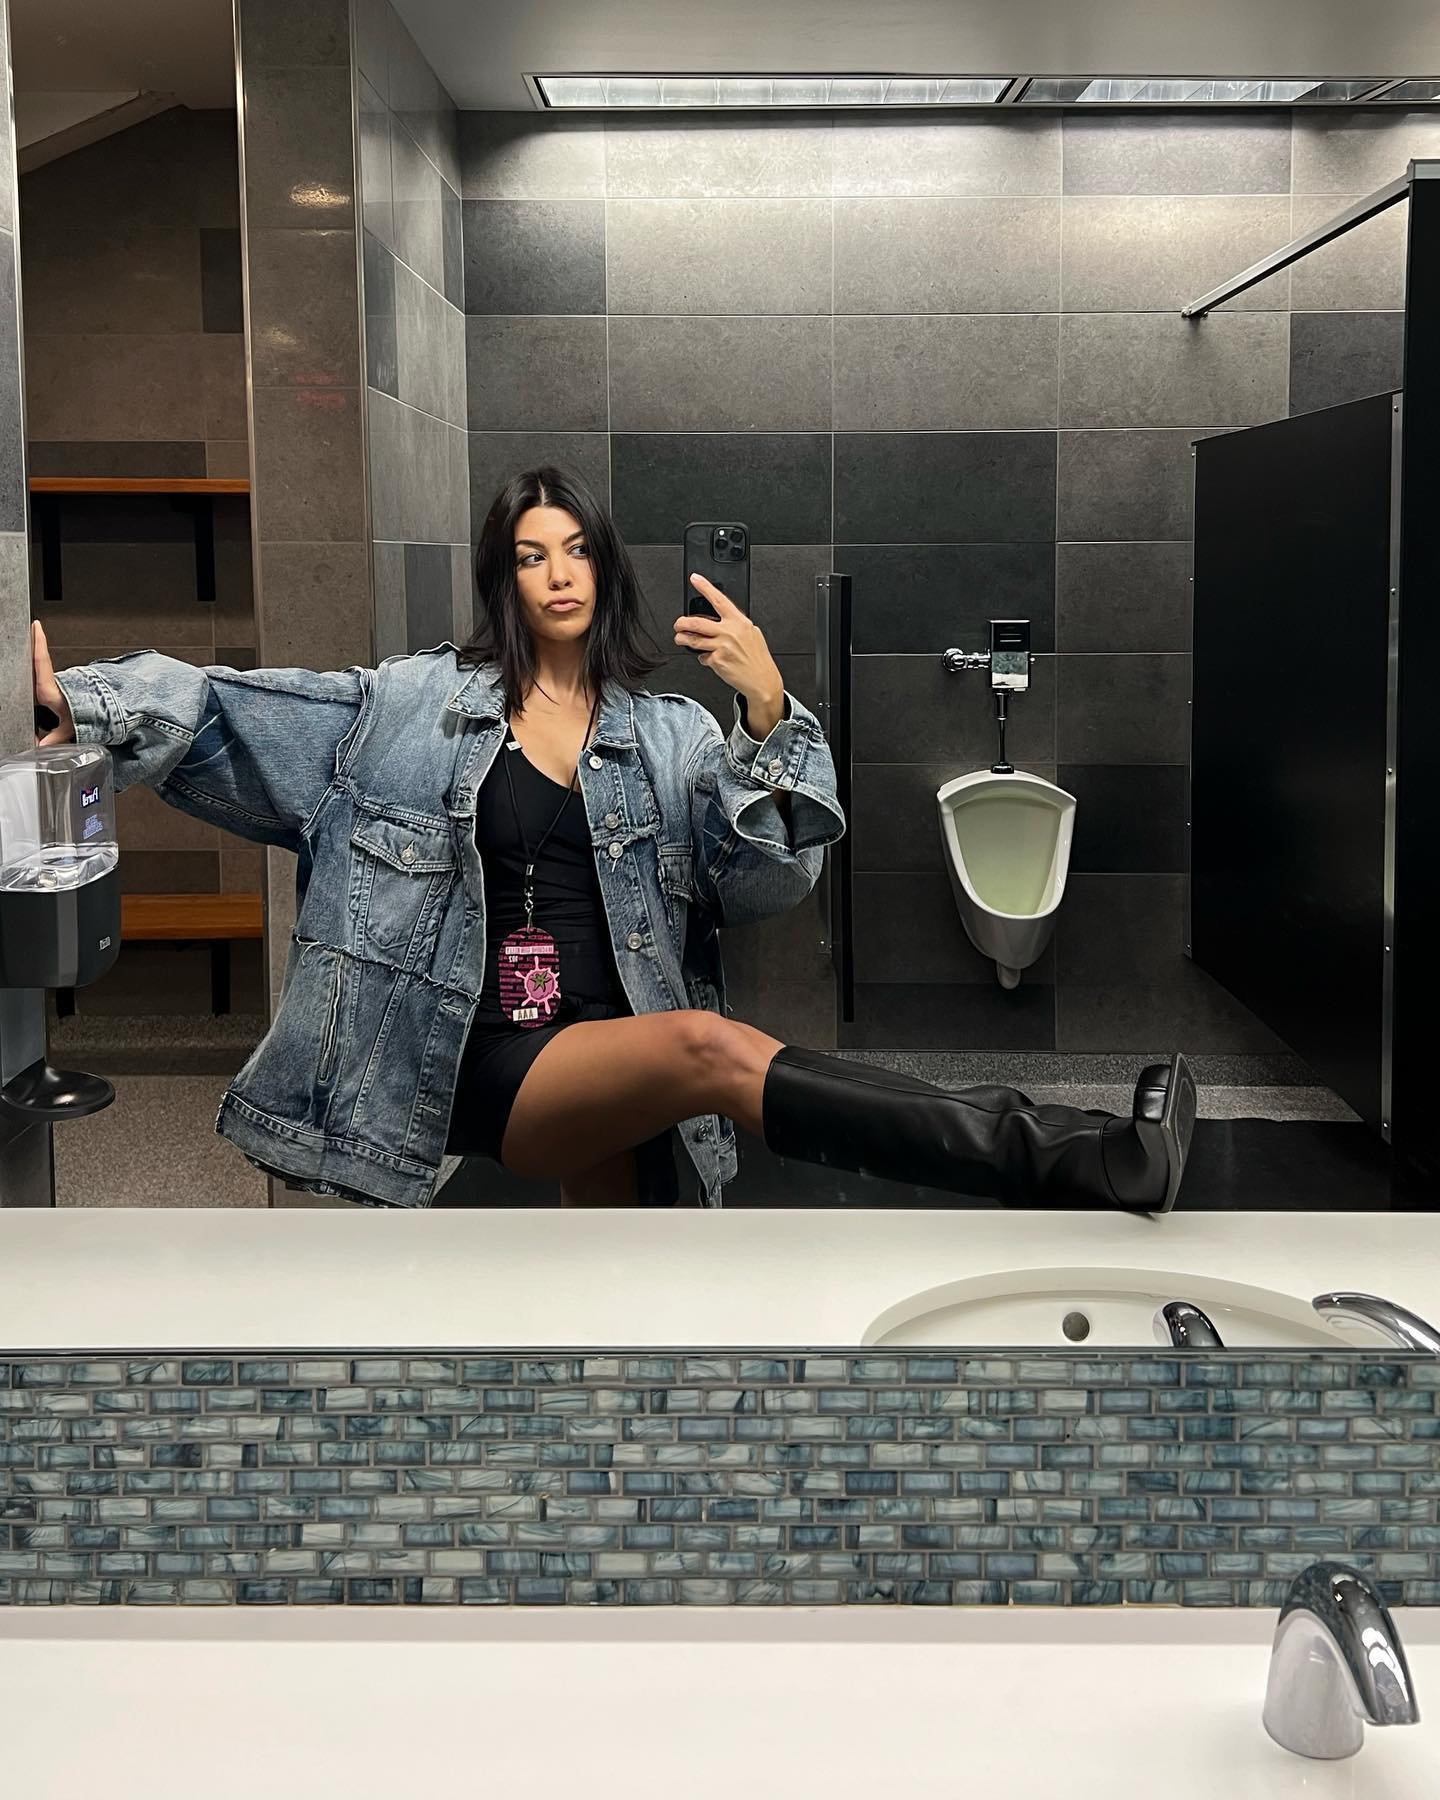 The Hulu star is a repeat offender, often sharing selfies from public bathrooms